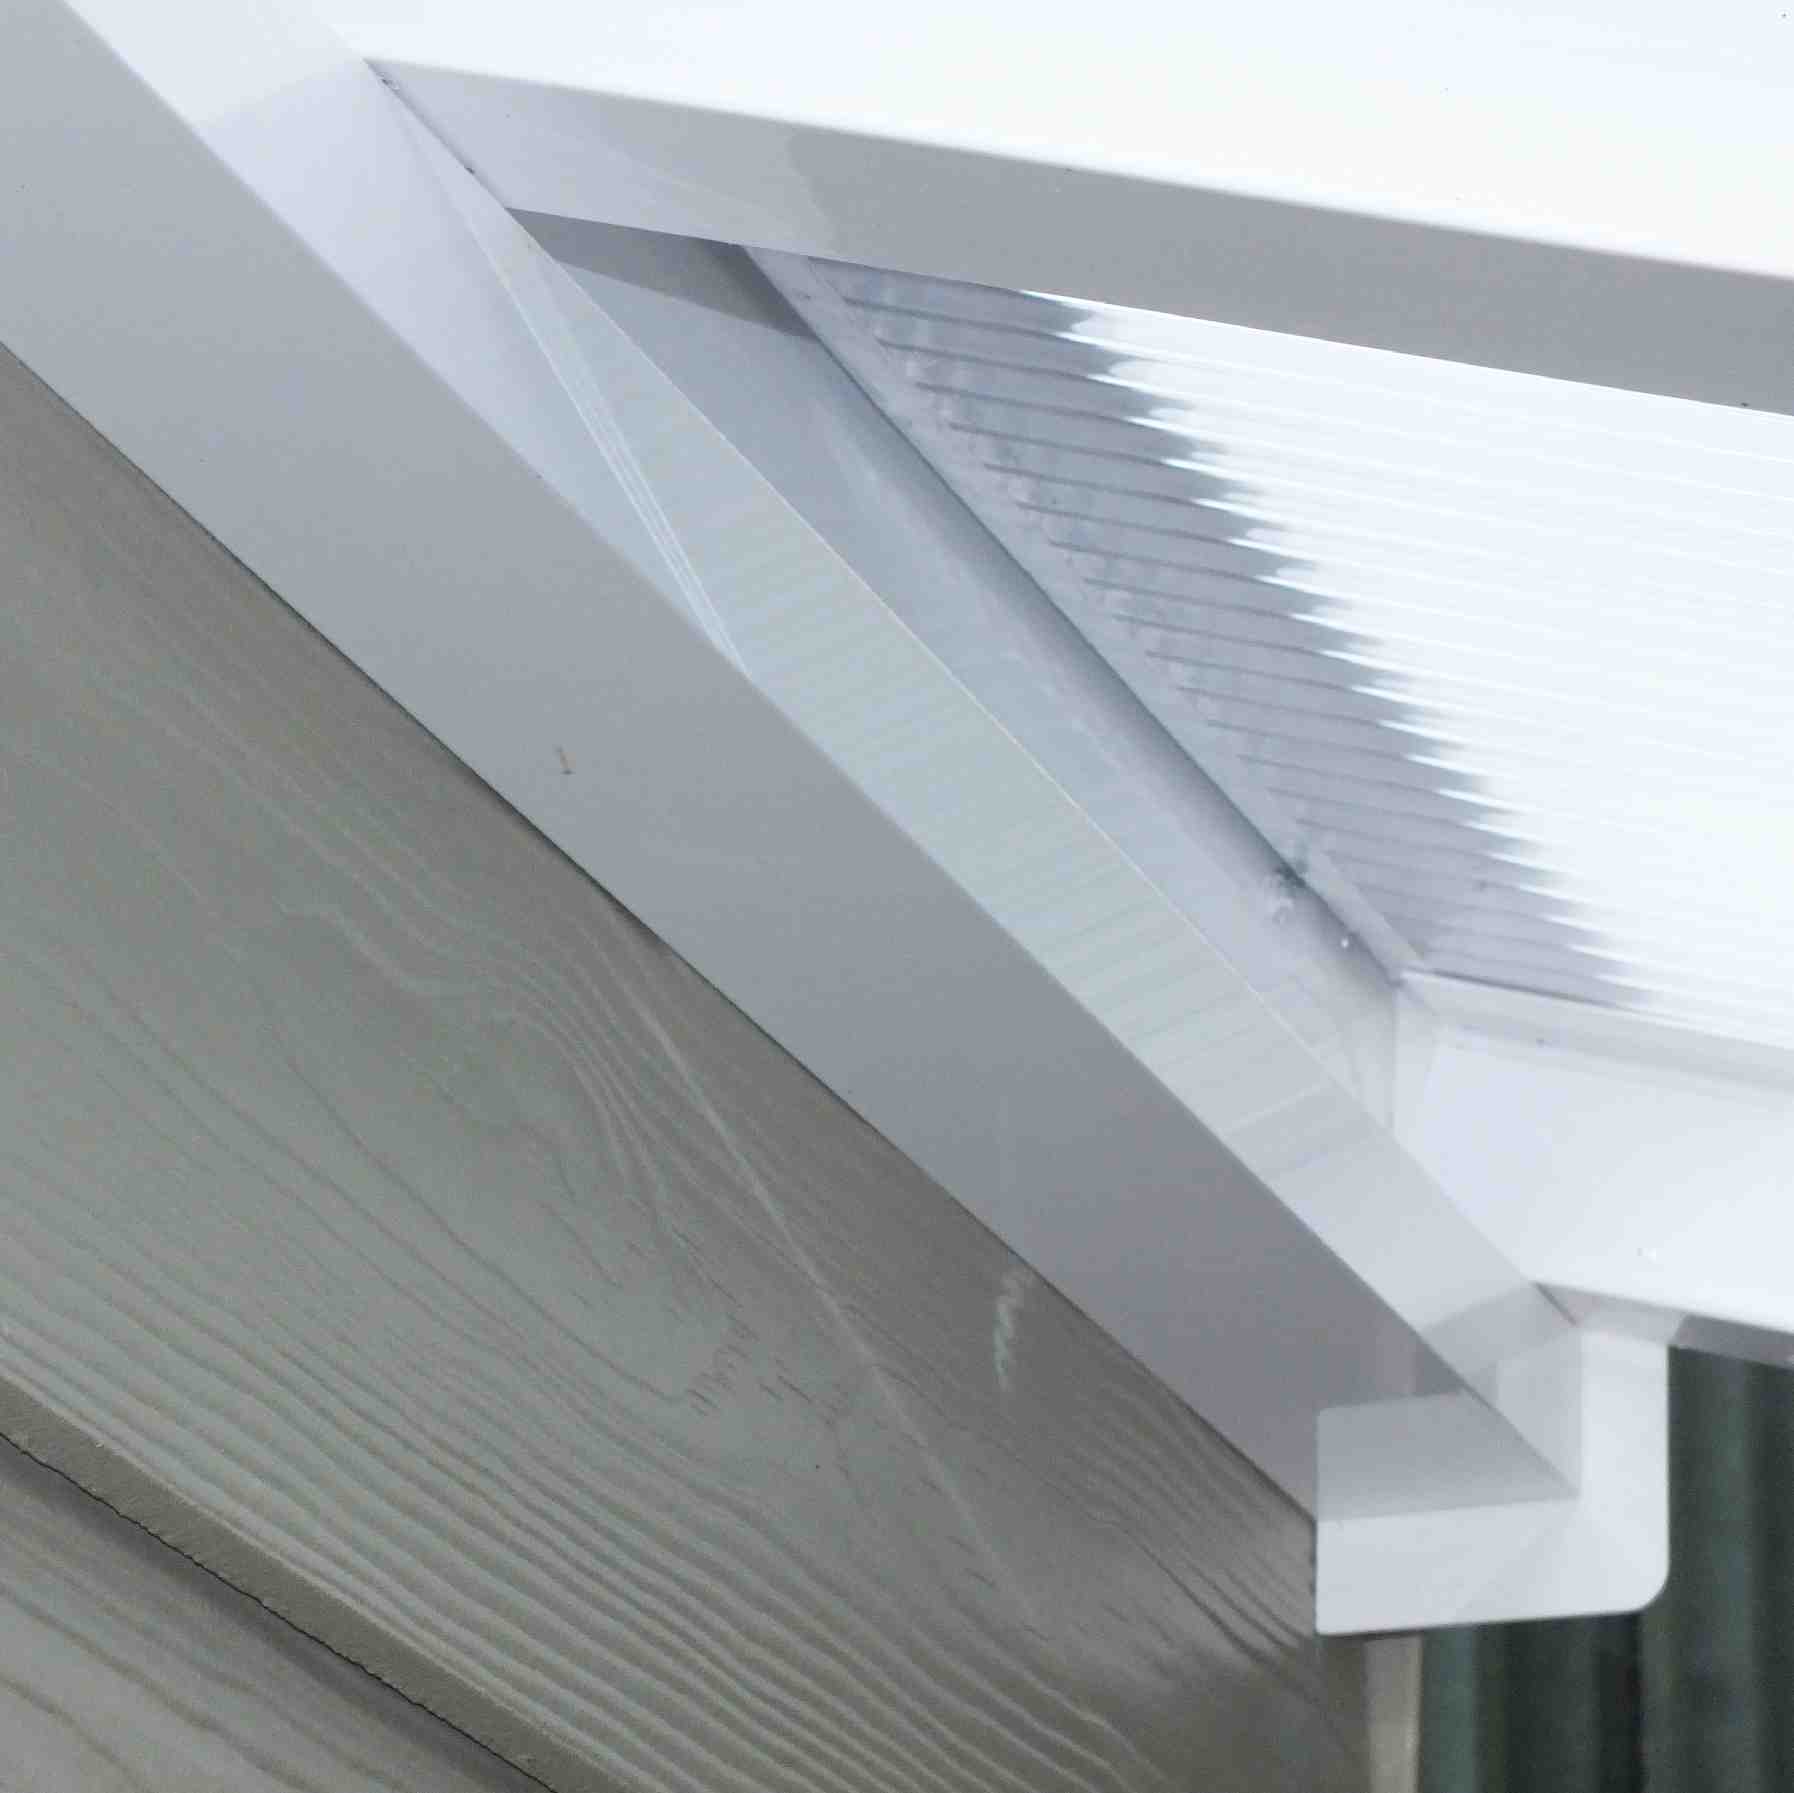 Great deals on Omega Verandah White with 16mm Polycarbonate Glazing - 8.4m (W) x 3.0m (P), (4) Supporting Posts